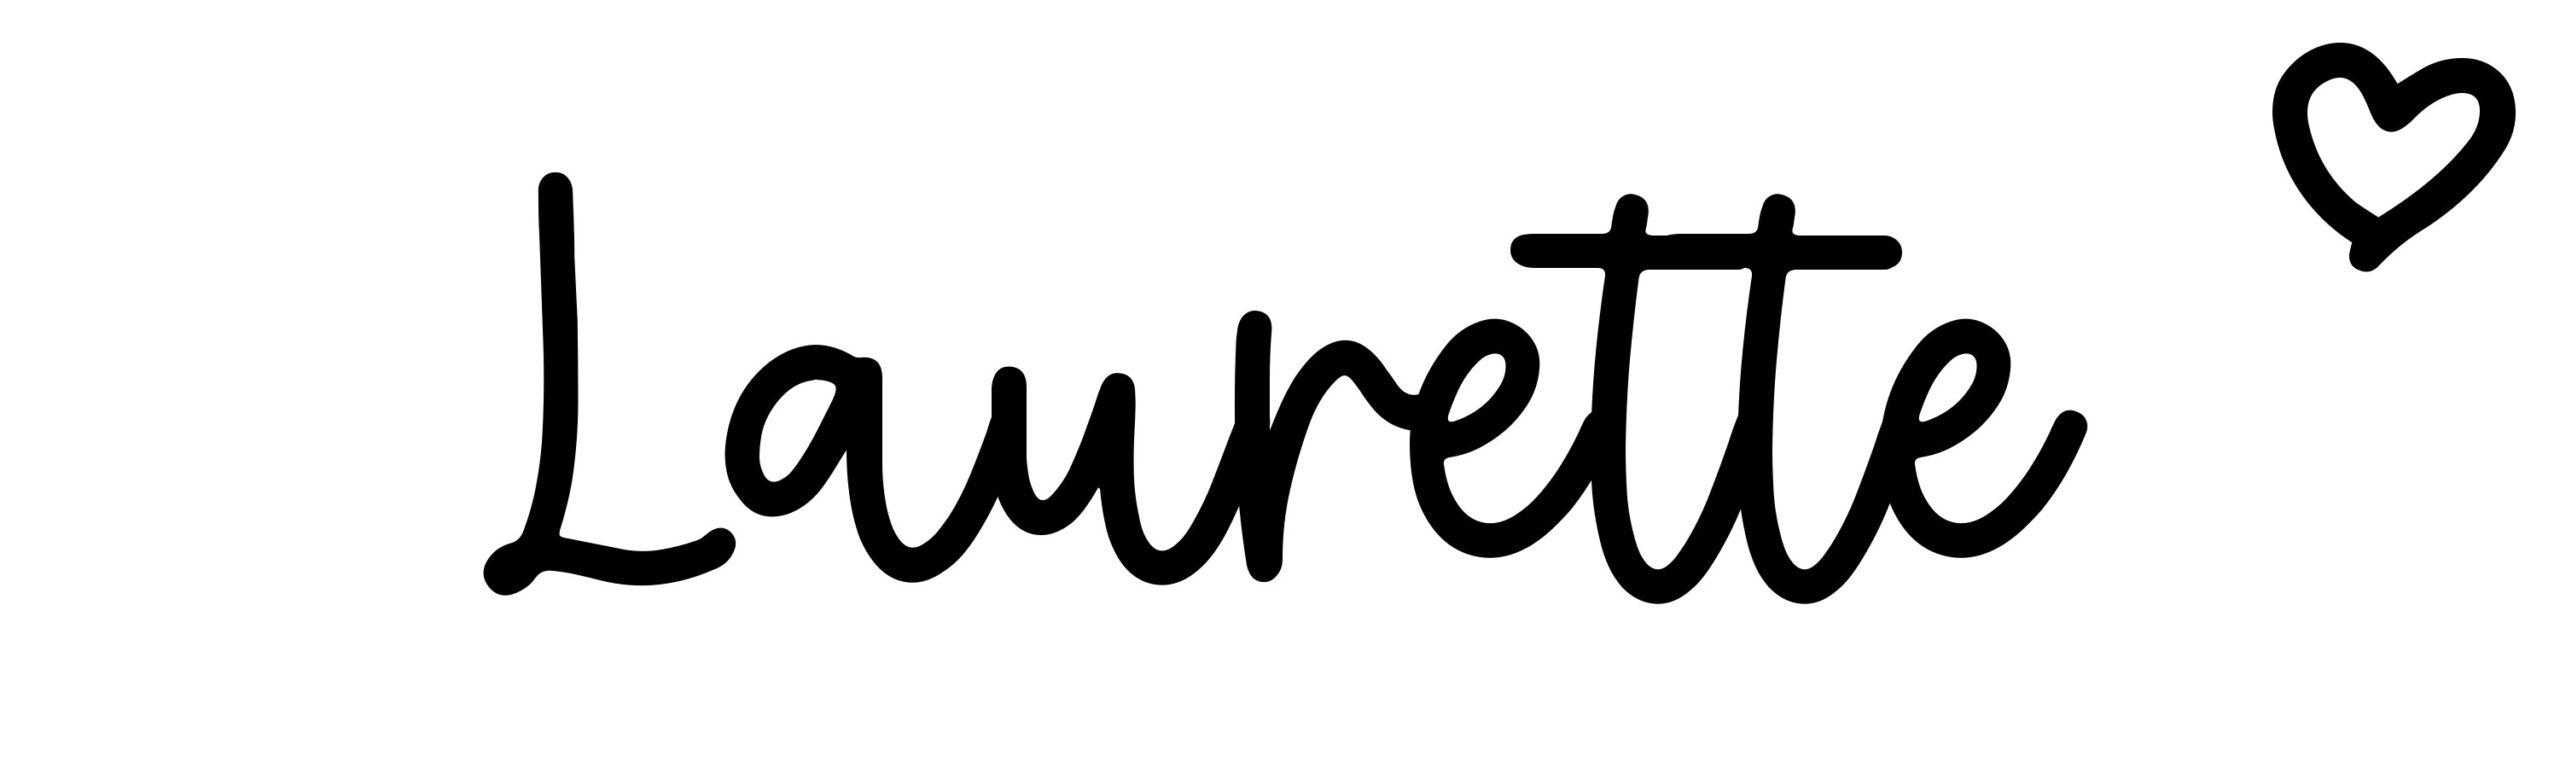 Laurette - Name meaning, origin, variations and more